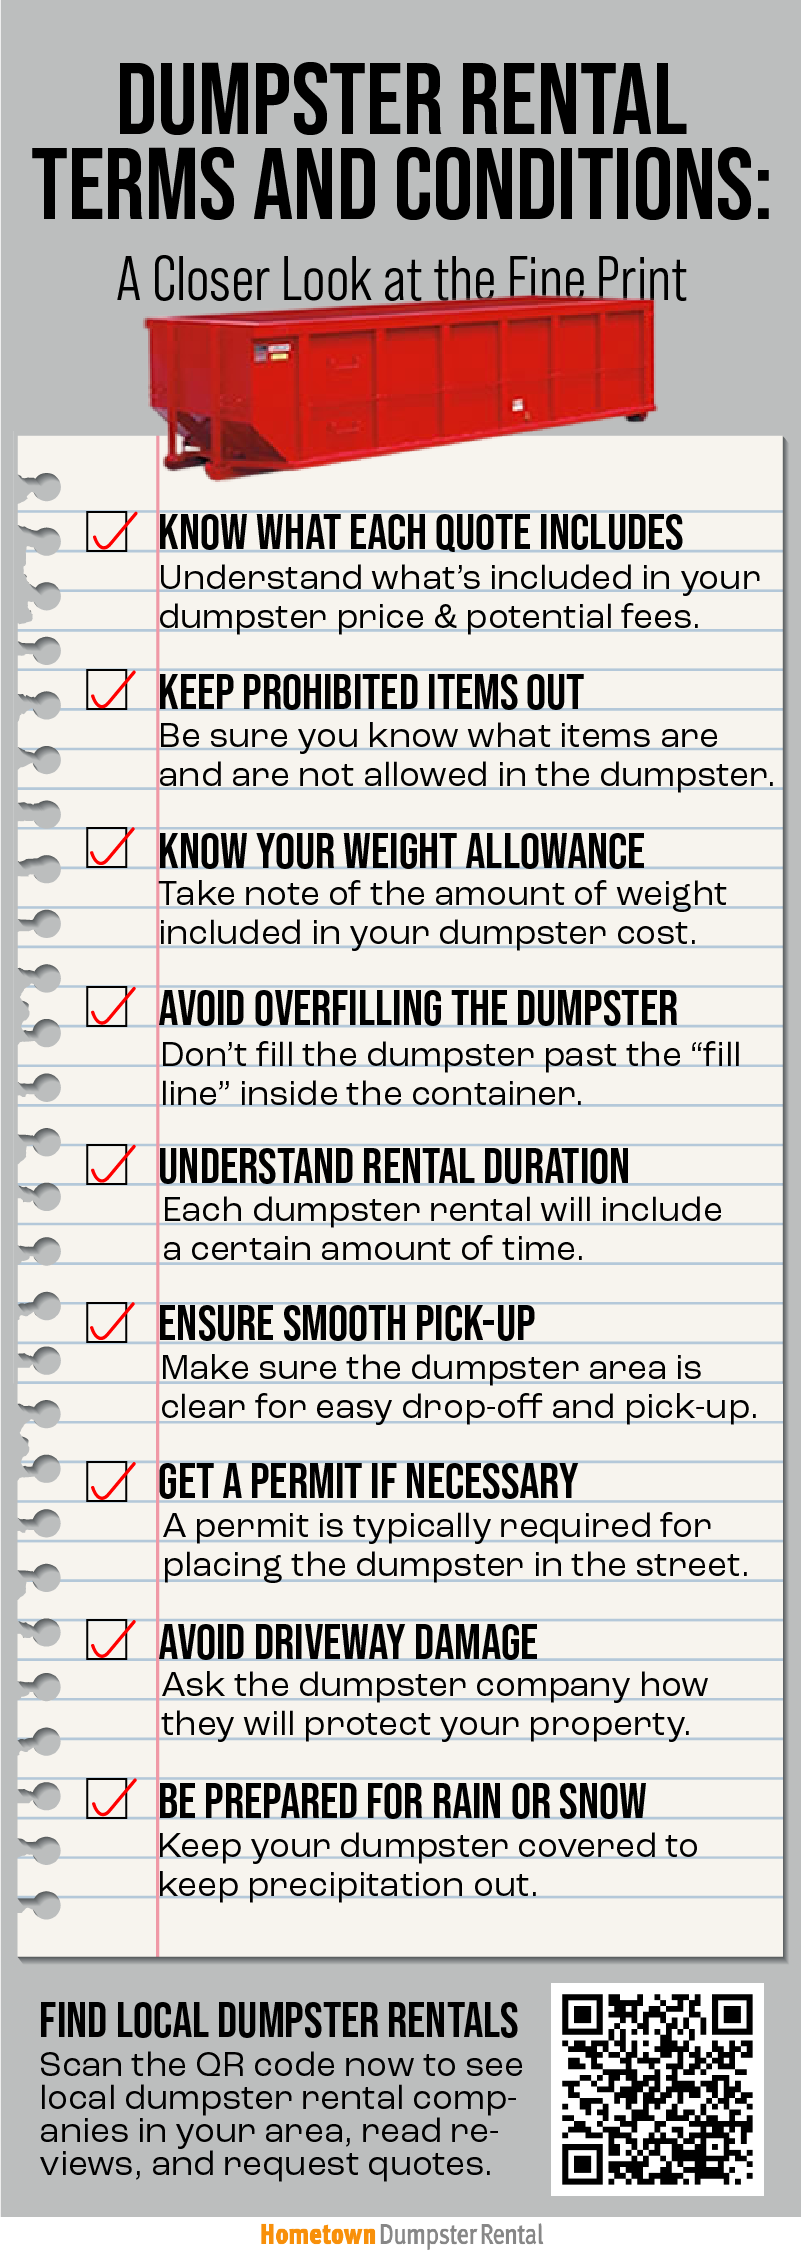 dumpster rental terms and conditions checklist infographic